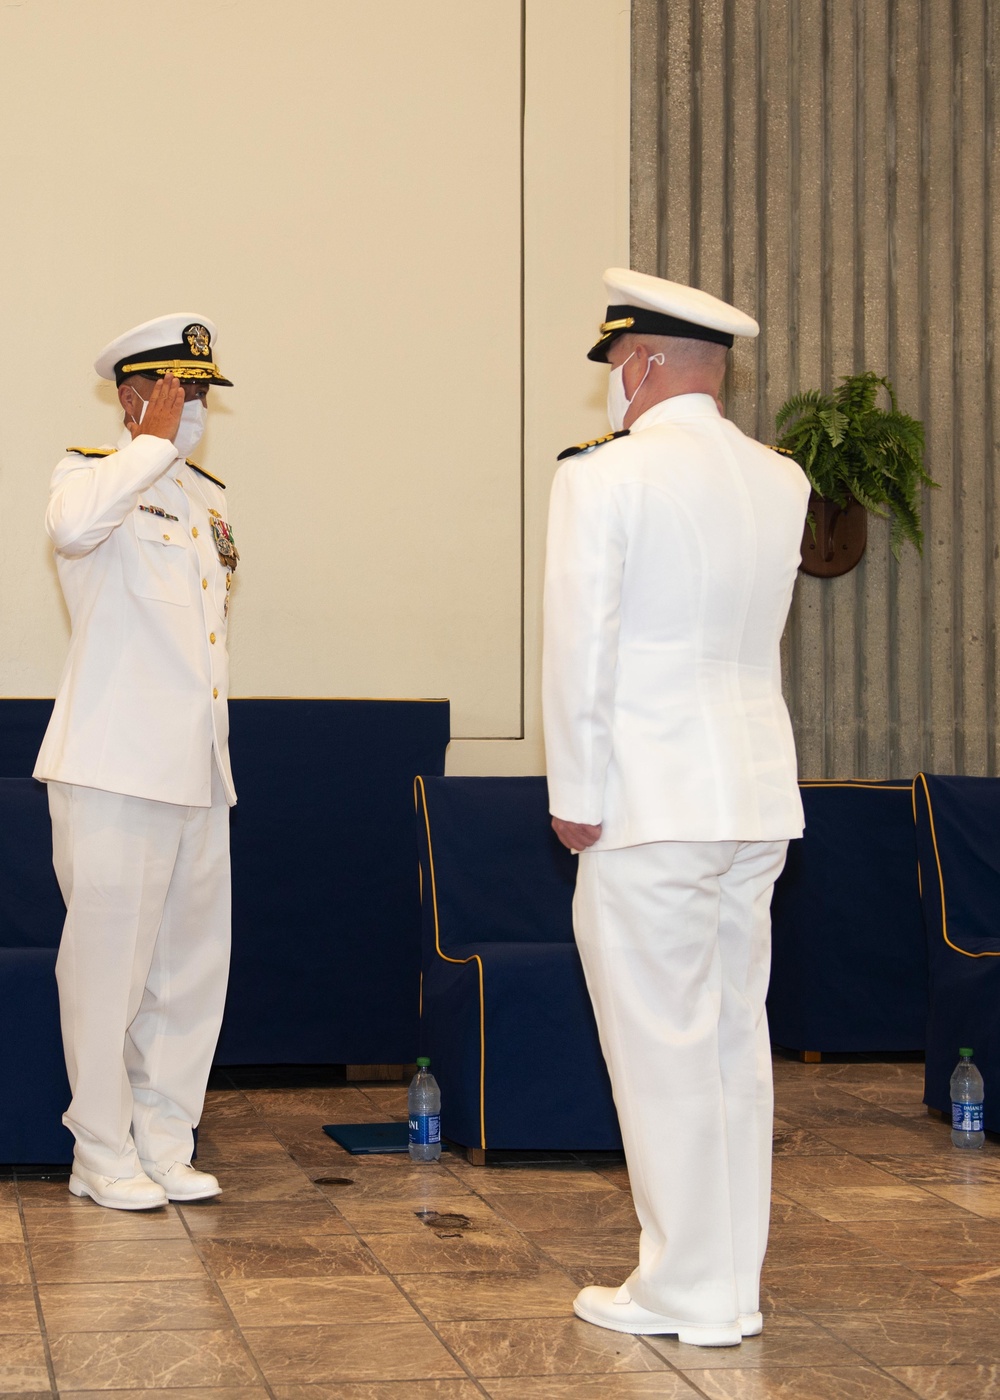 Commander, Submarine Squadron 16 Holds Change of Command